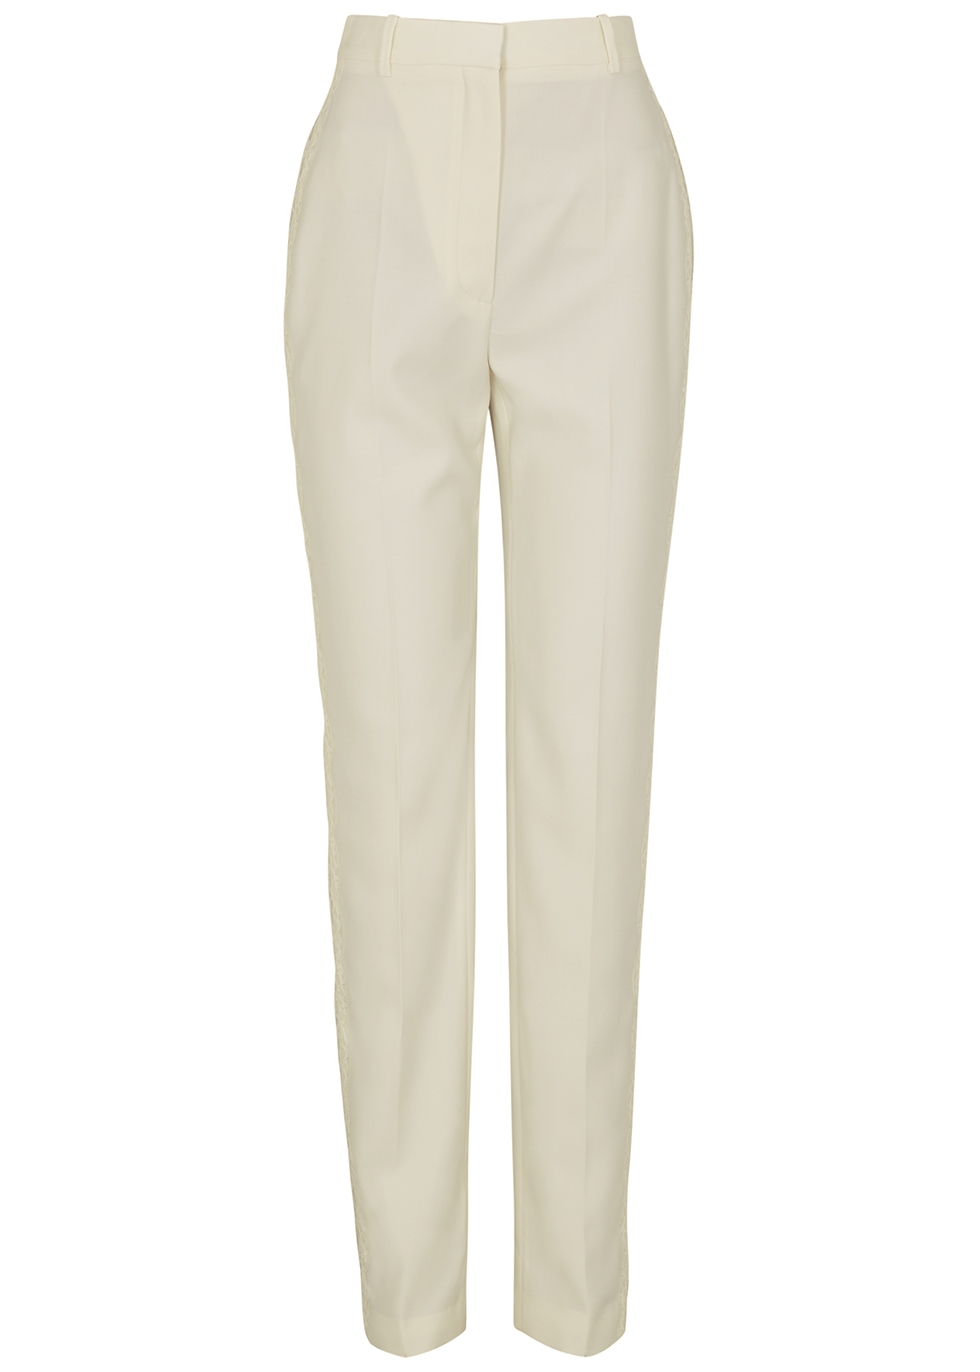 Ivory lace-trimmed wool trousers